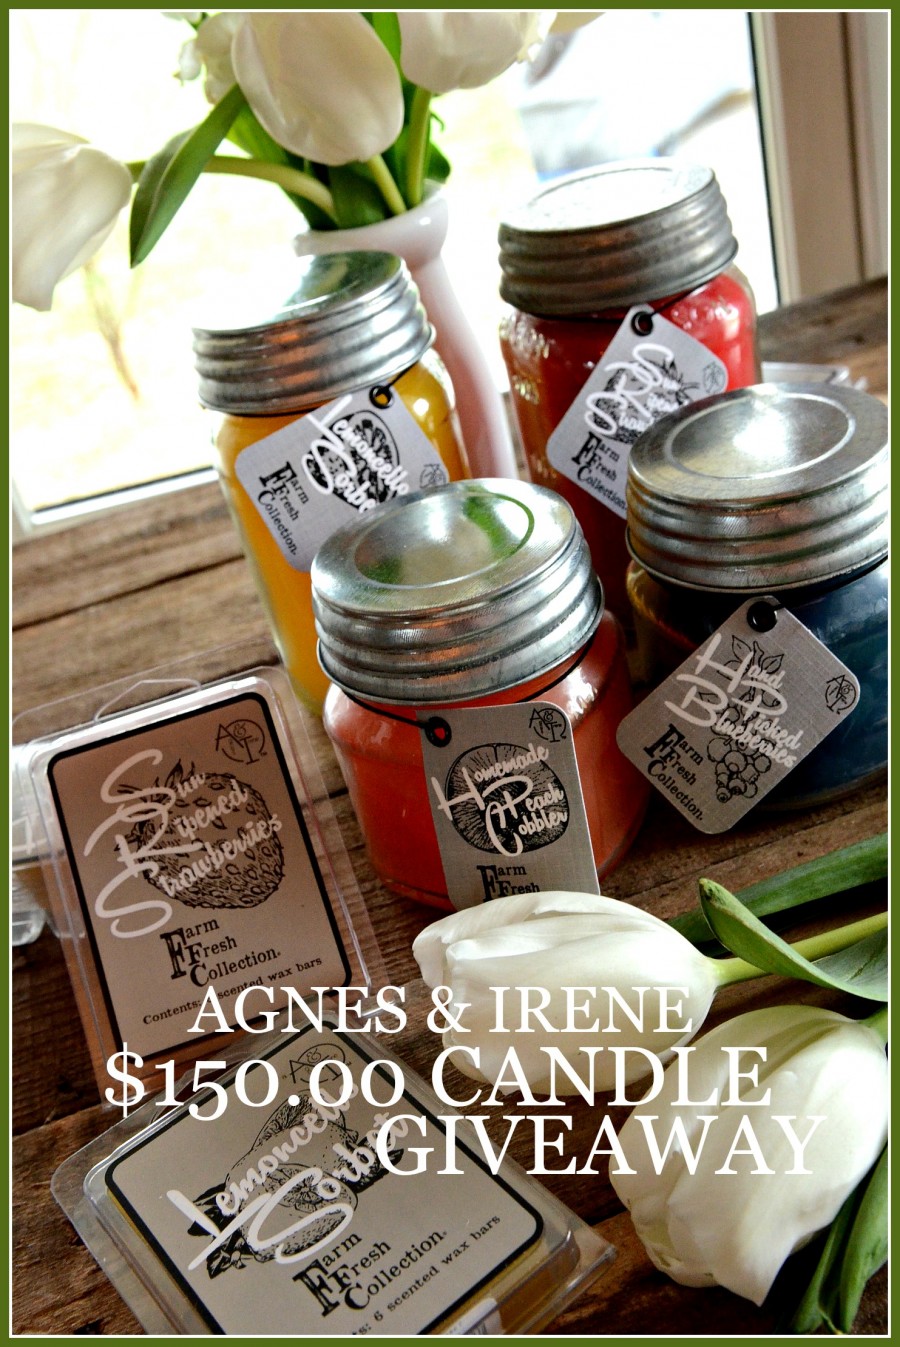 AGNES AND IRENE $150.00 CANDLE GIVEAWAY